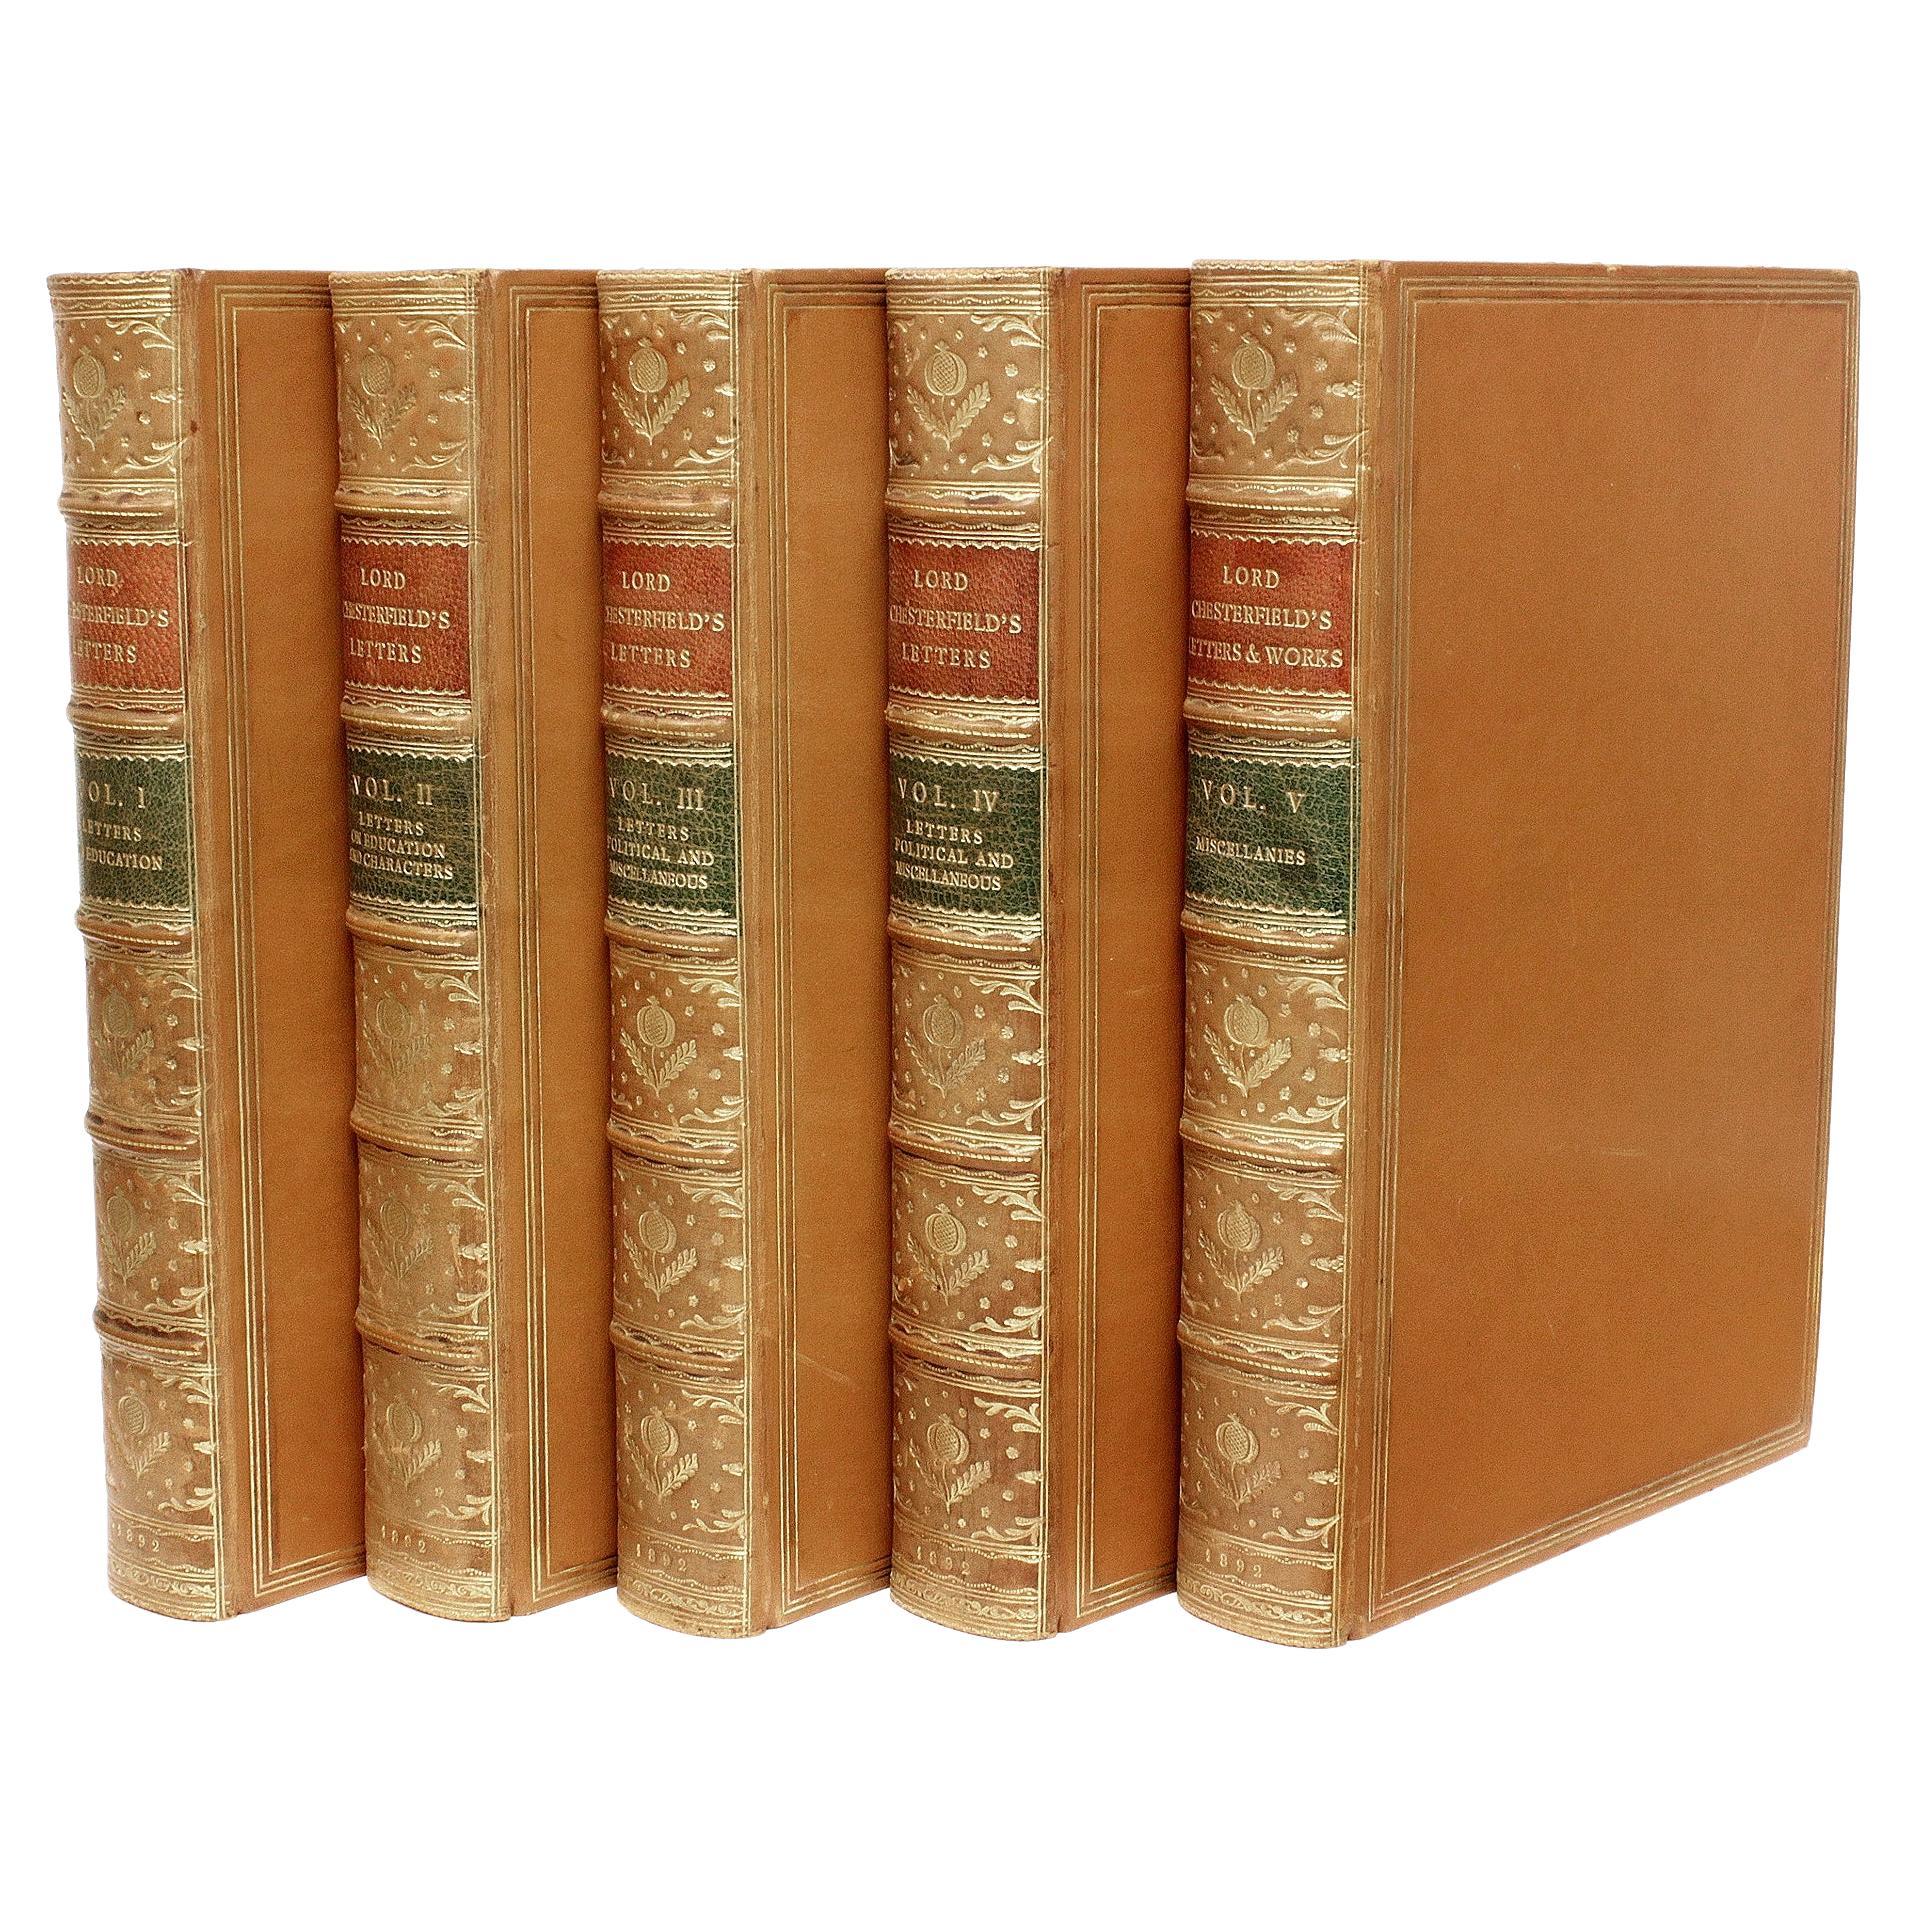 MAHON, Lord. The Letters Of Philip Dormer Stanhope. 5 vols. 1892 IN FULL LEATHER For Sale